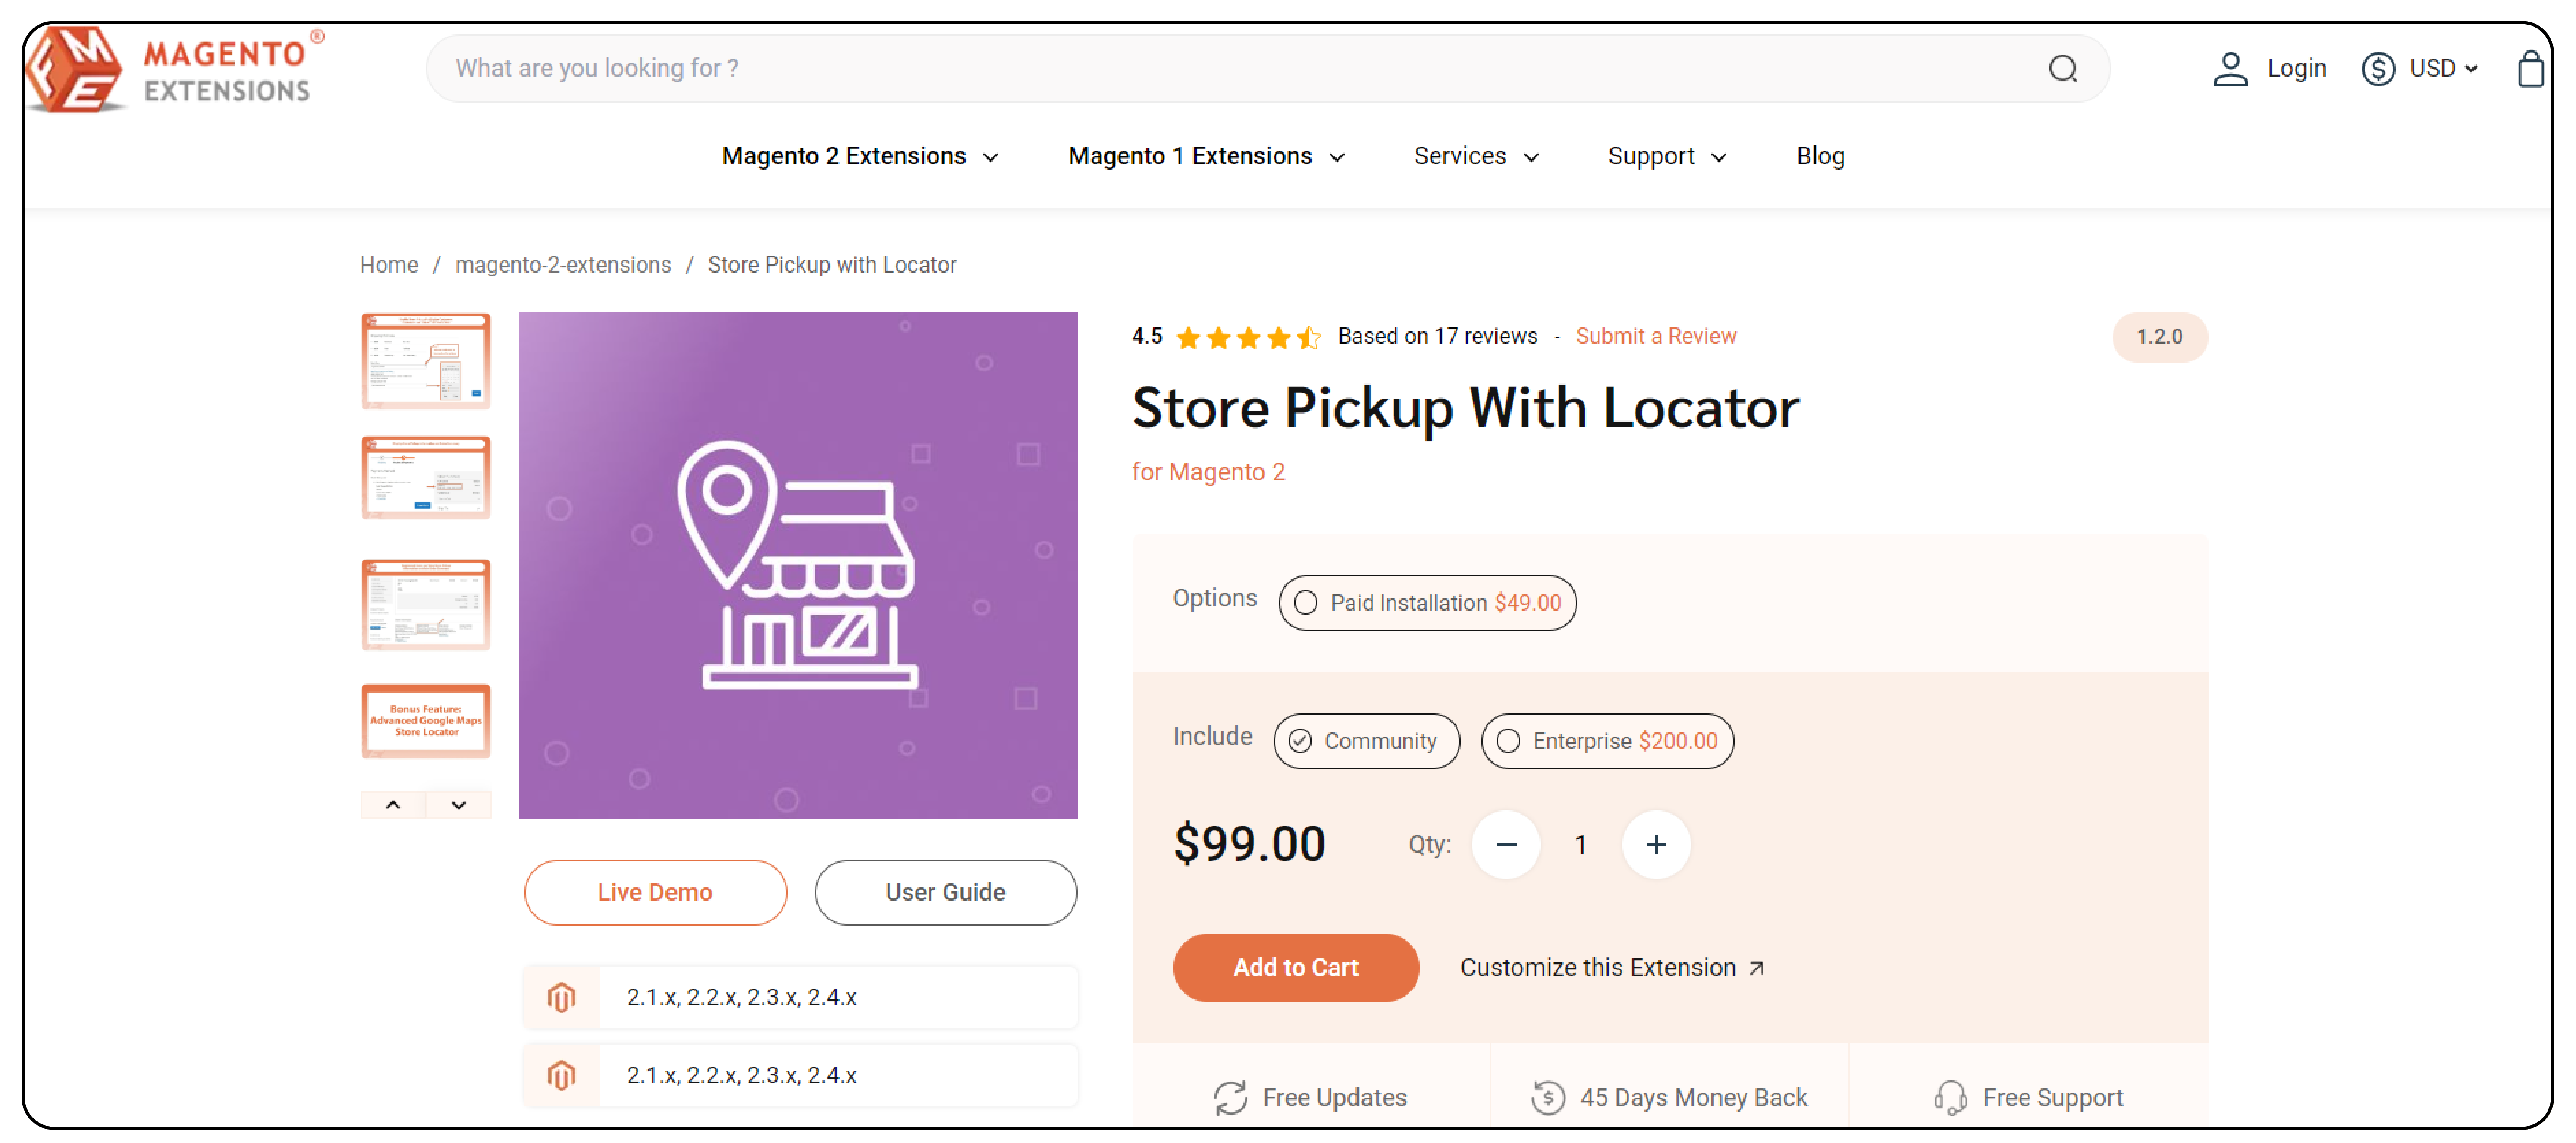 Store Pickup with Locator for Magento 2 - FME Extensions